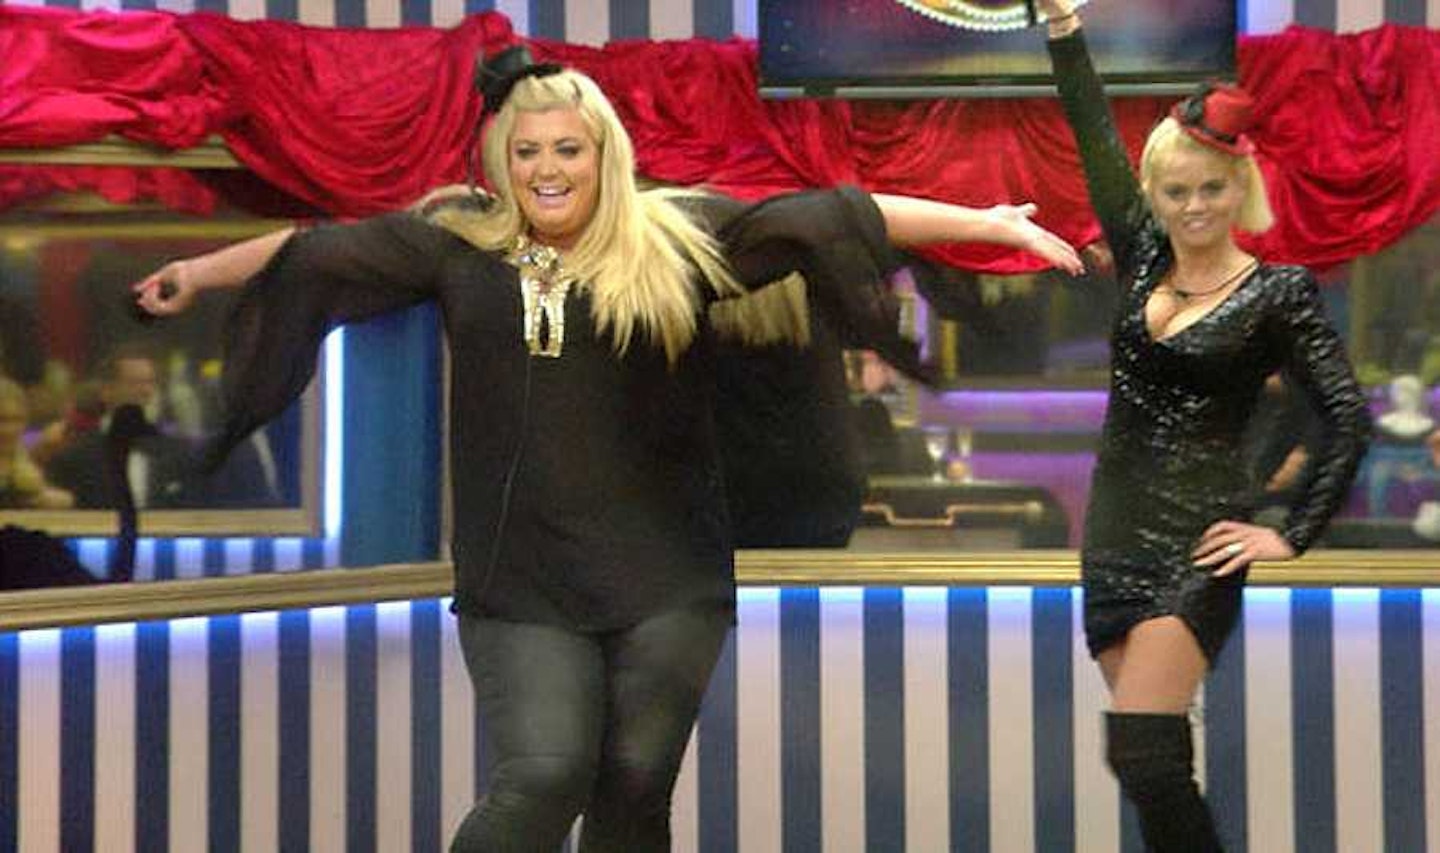 Swipe through to see Gemma Collins' BEST Celebrity Big Brother moments...